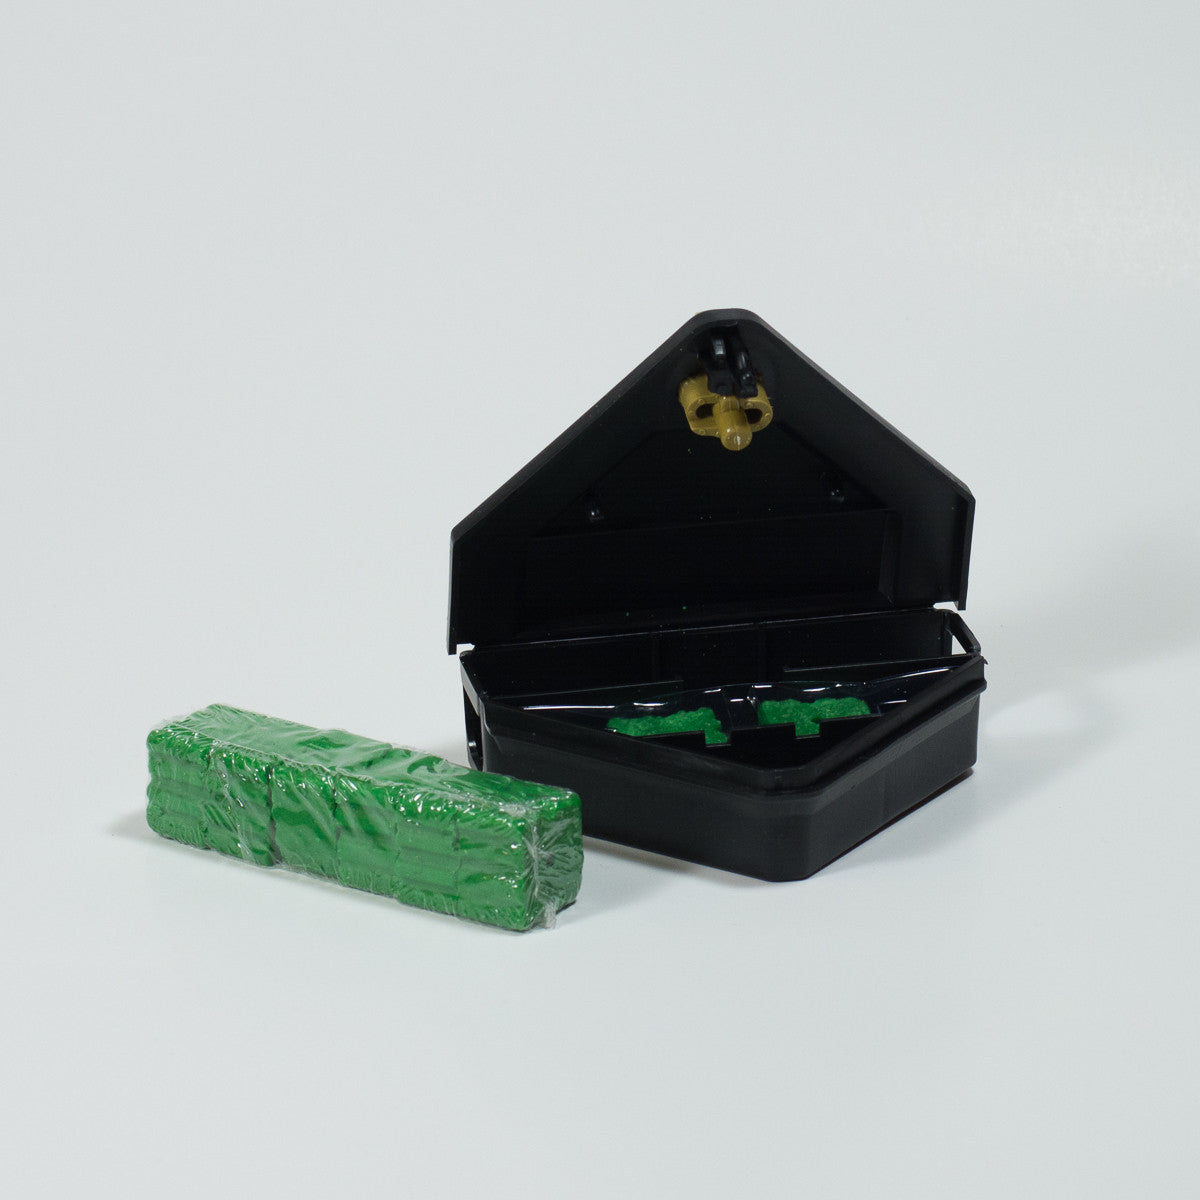 Mouse Bait Blocks including 8 Blocks and a Refillable Bait Station